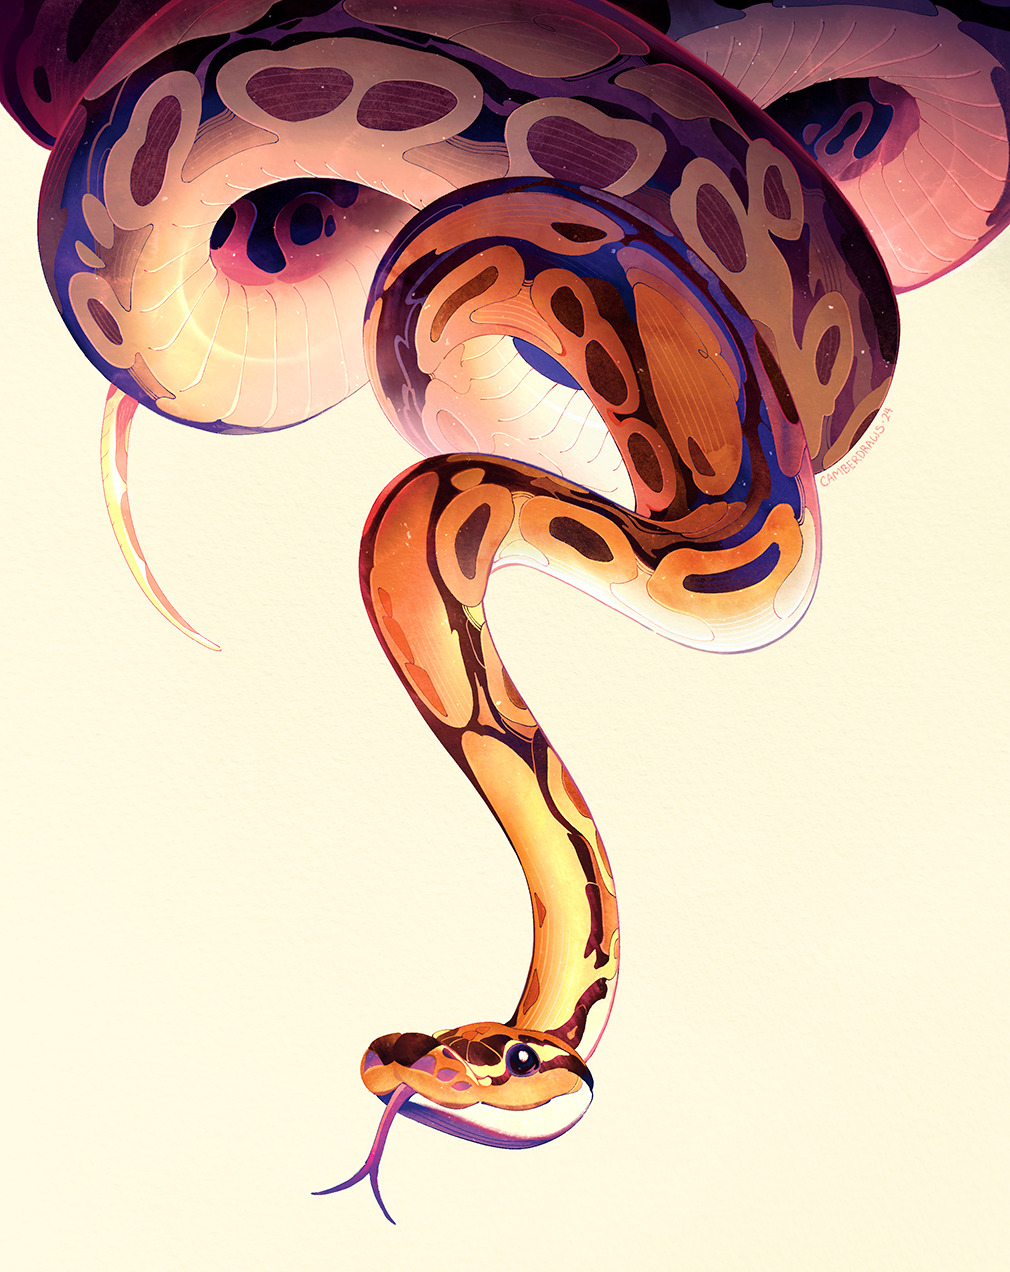 A digital drawing of a ball python descending from the top of the page. It has a very cute face and boopable nose.